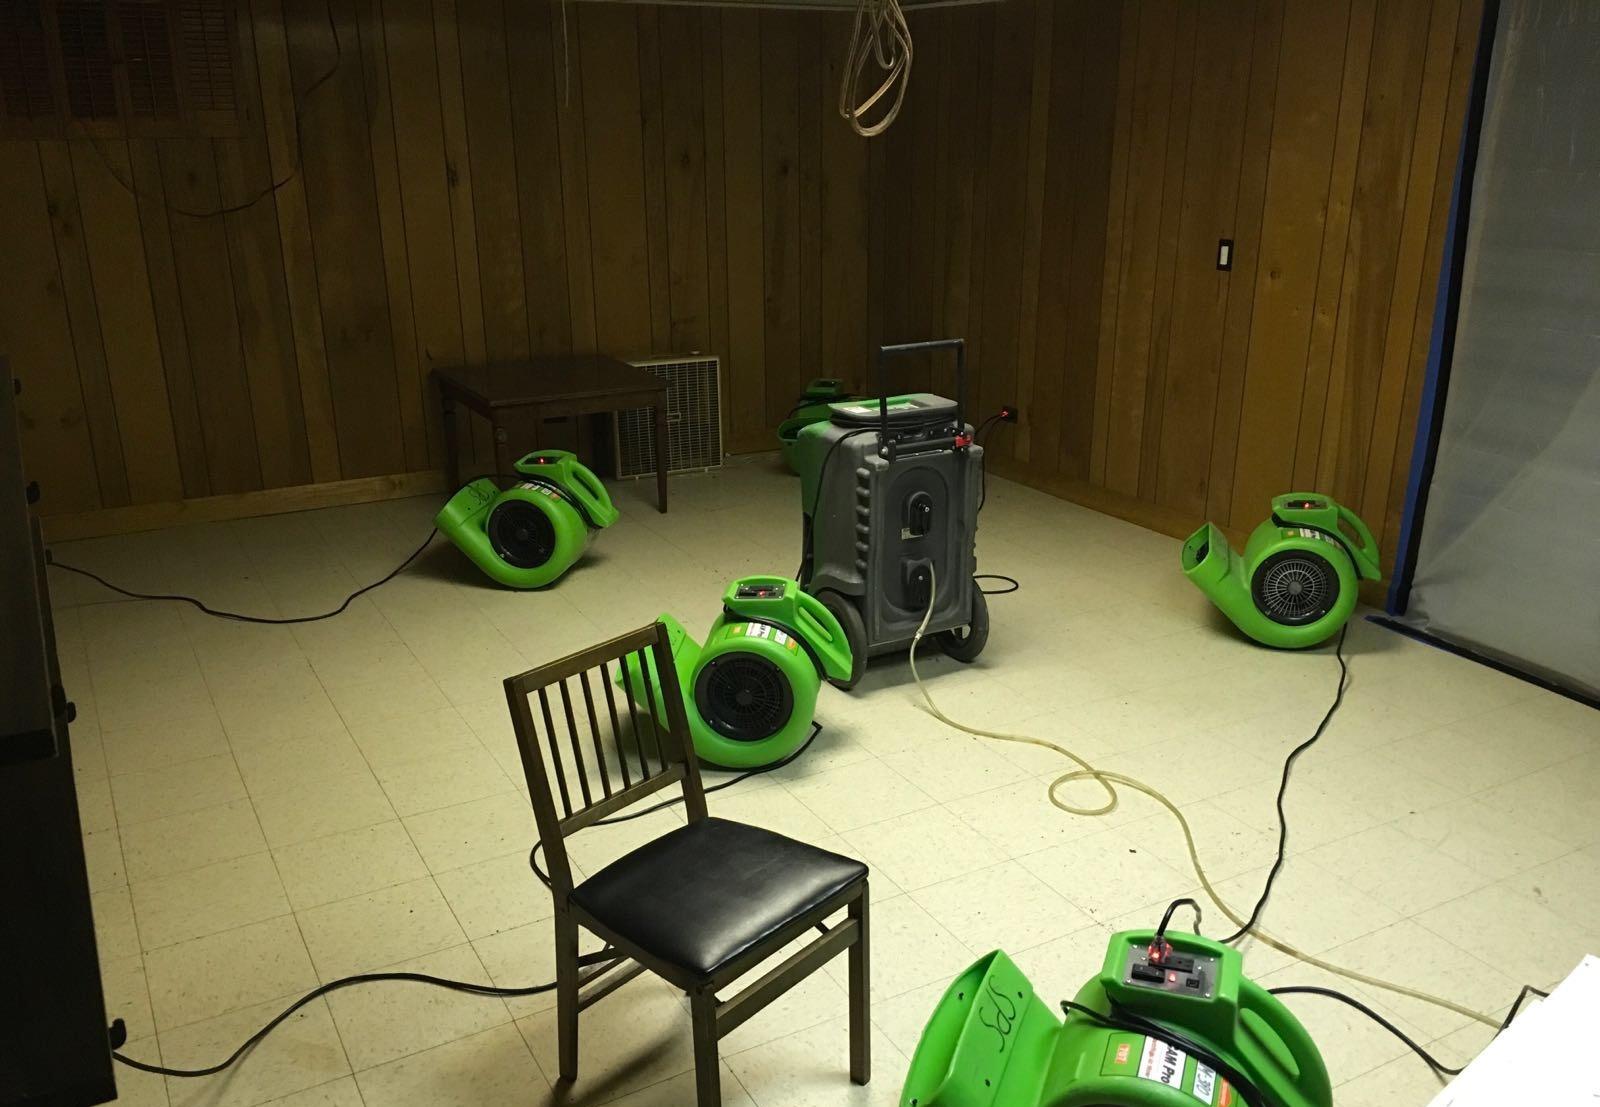 The SERVPRO equipment is up and running after a small water loss.